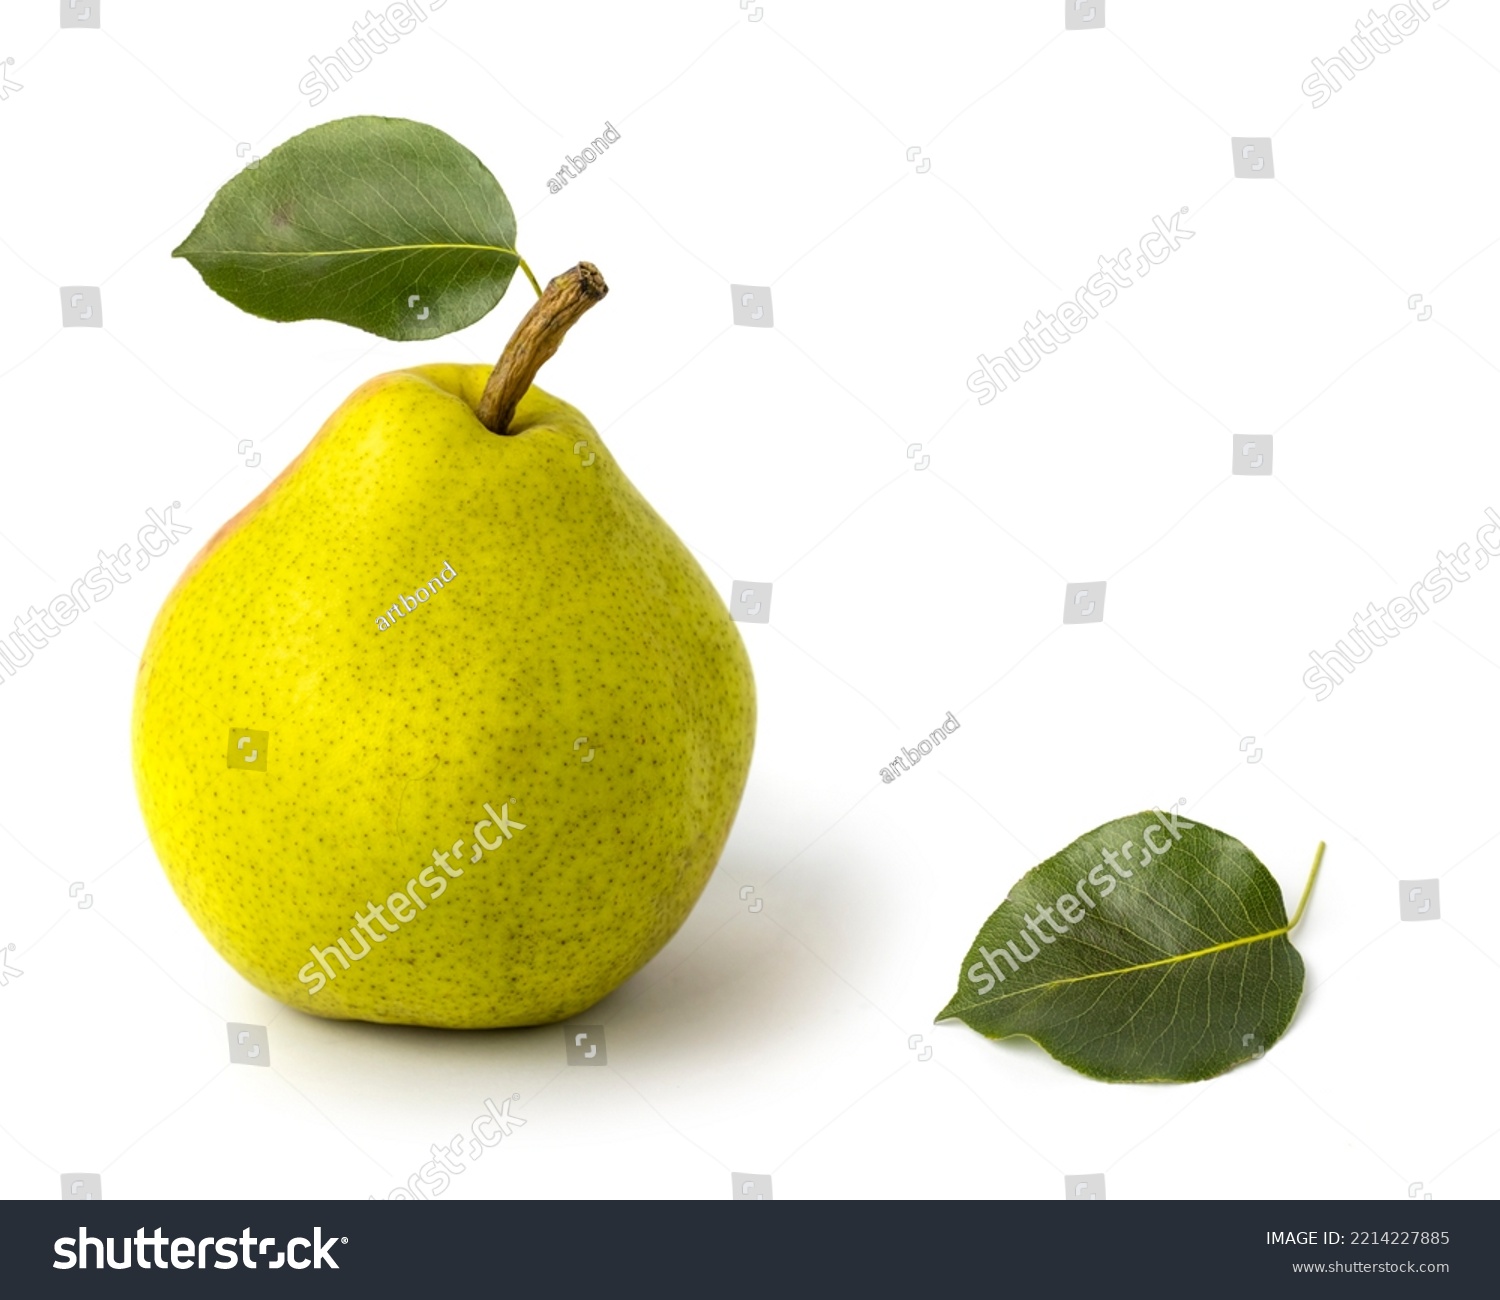 Image of pear on a white background. Pear with leaves close up #2214227885